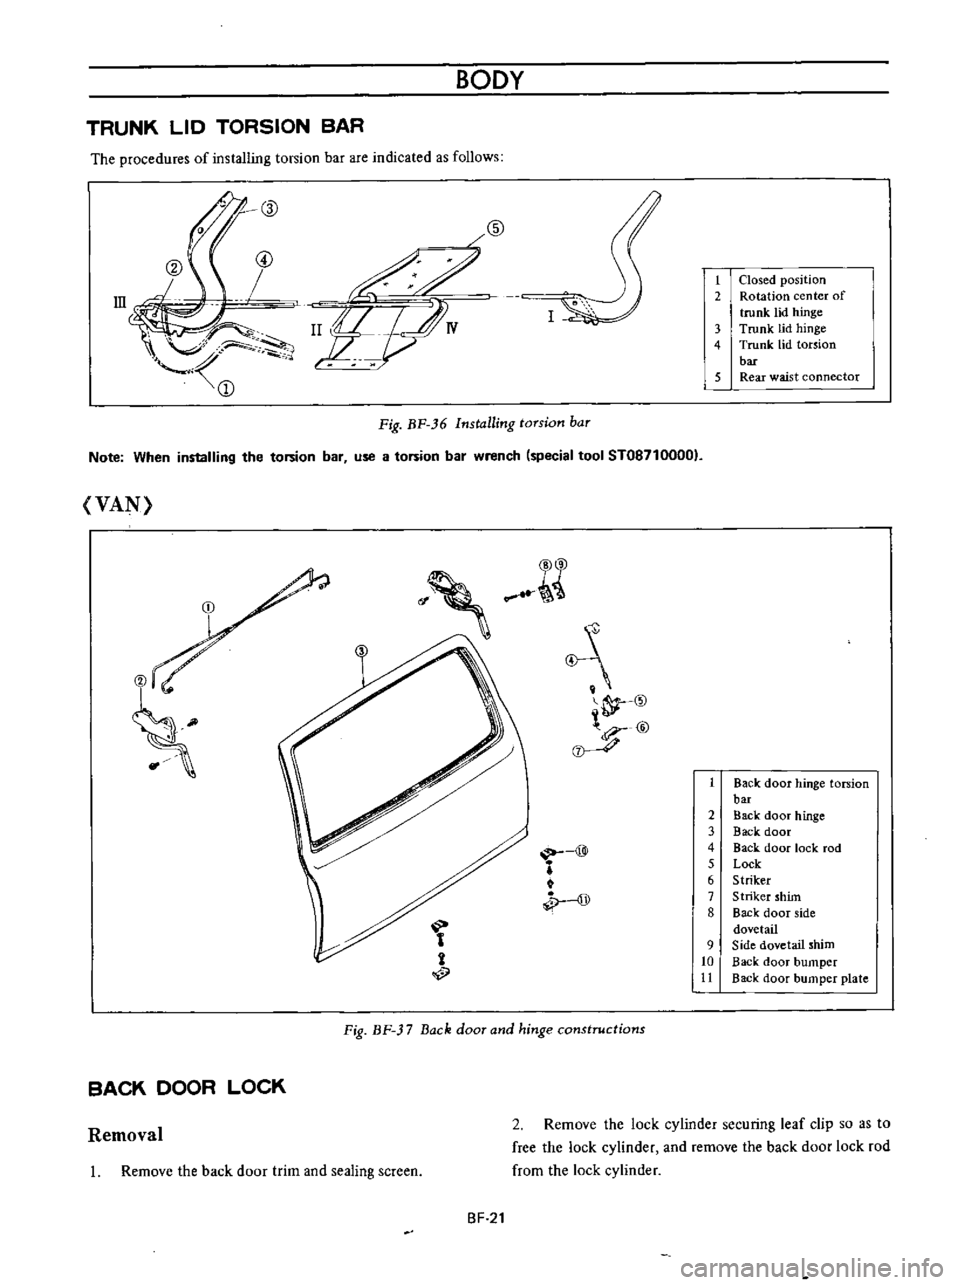 DATSUN B110 1973  Service Repair Manual 
BODY

TRUNK 
LID 
TORSION 
BAR

The

procedures 
of

installing 
torsion 
bar

are 
indicated 
as 
follows

ill 
ID

f 
Jw

V
@

@

Fig 
BF 
36

Installing 
torsion 
bar 
1

Closed

position

2 
Rota